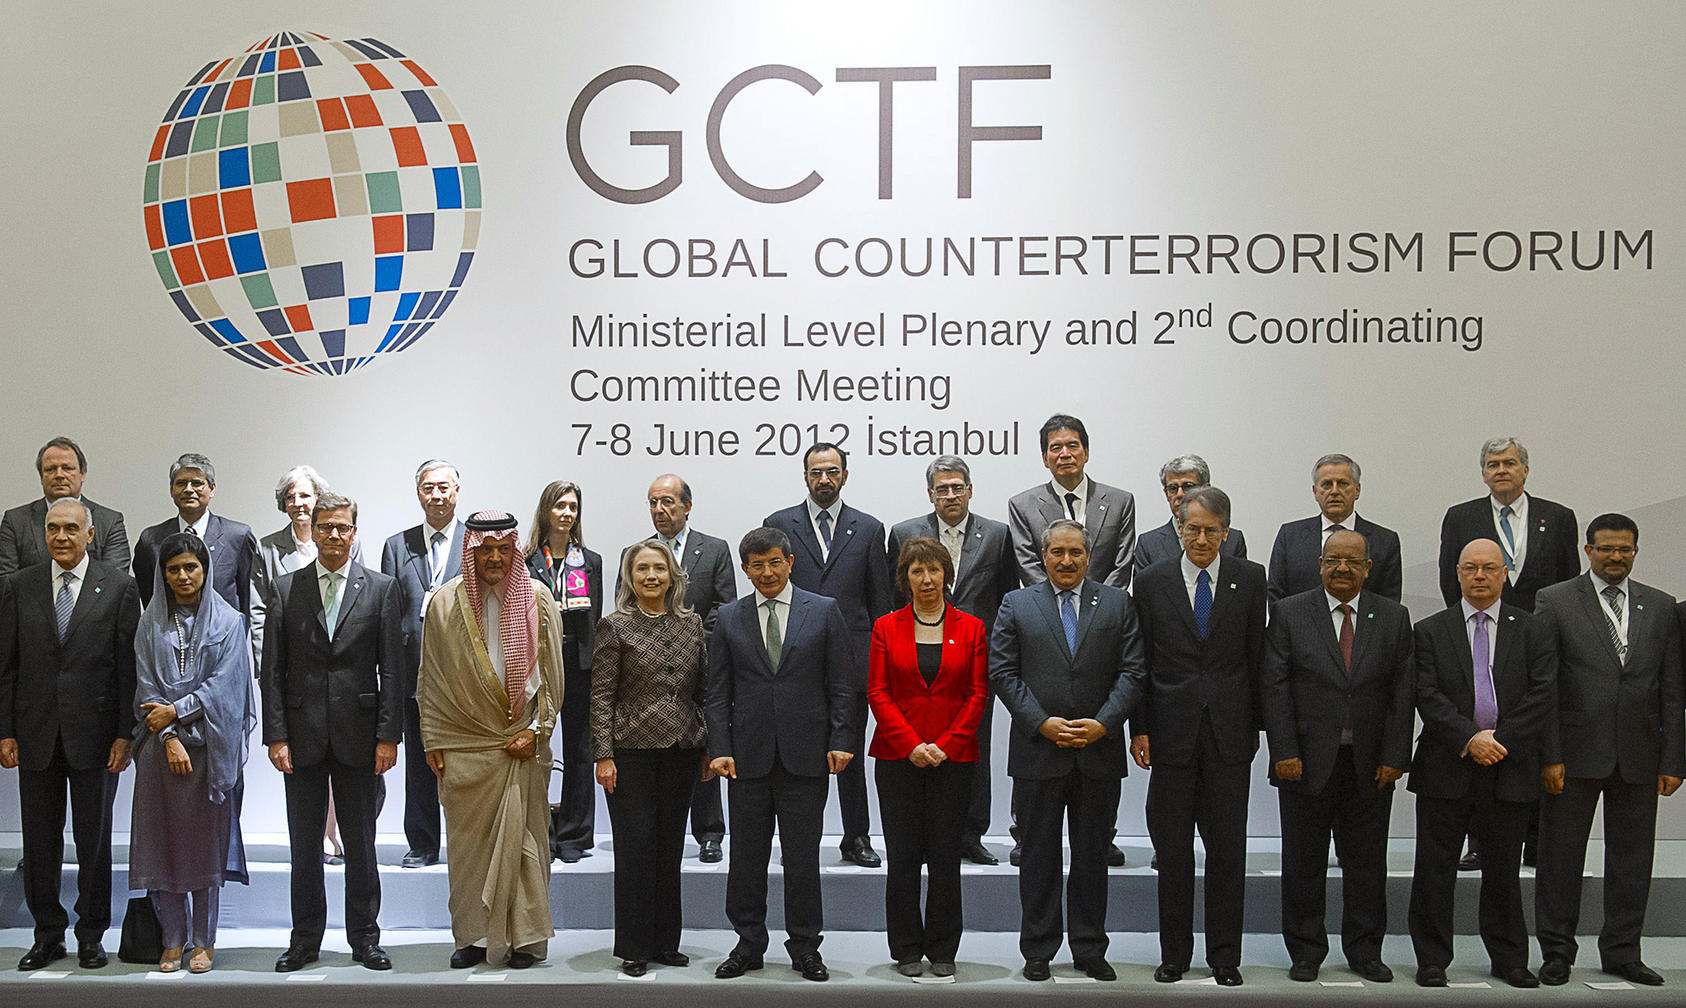 GCTF representatives pose for a group photo at the ministerial plenary meeting in Istanbul on June 7, 2012. (Saul Loeb/AP)